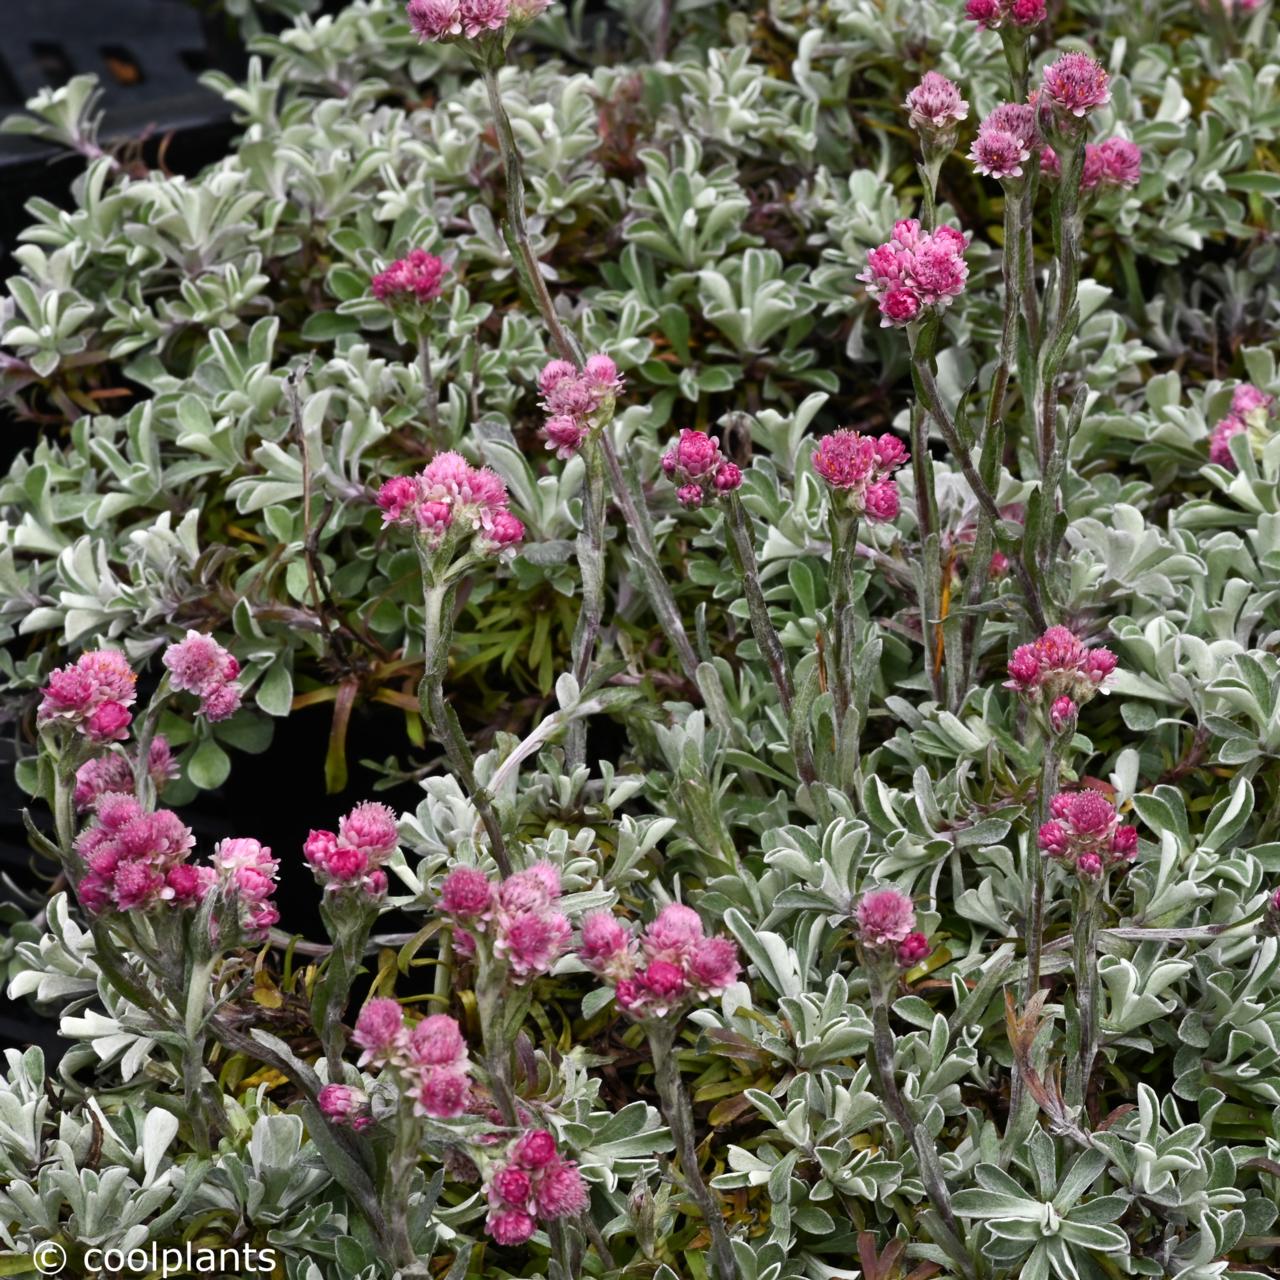 Antennaria dioica 'Rotes Wunder' plant